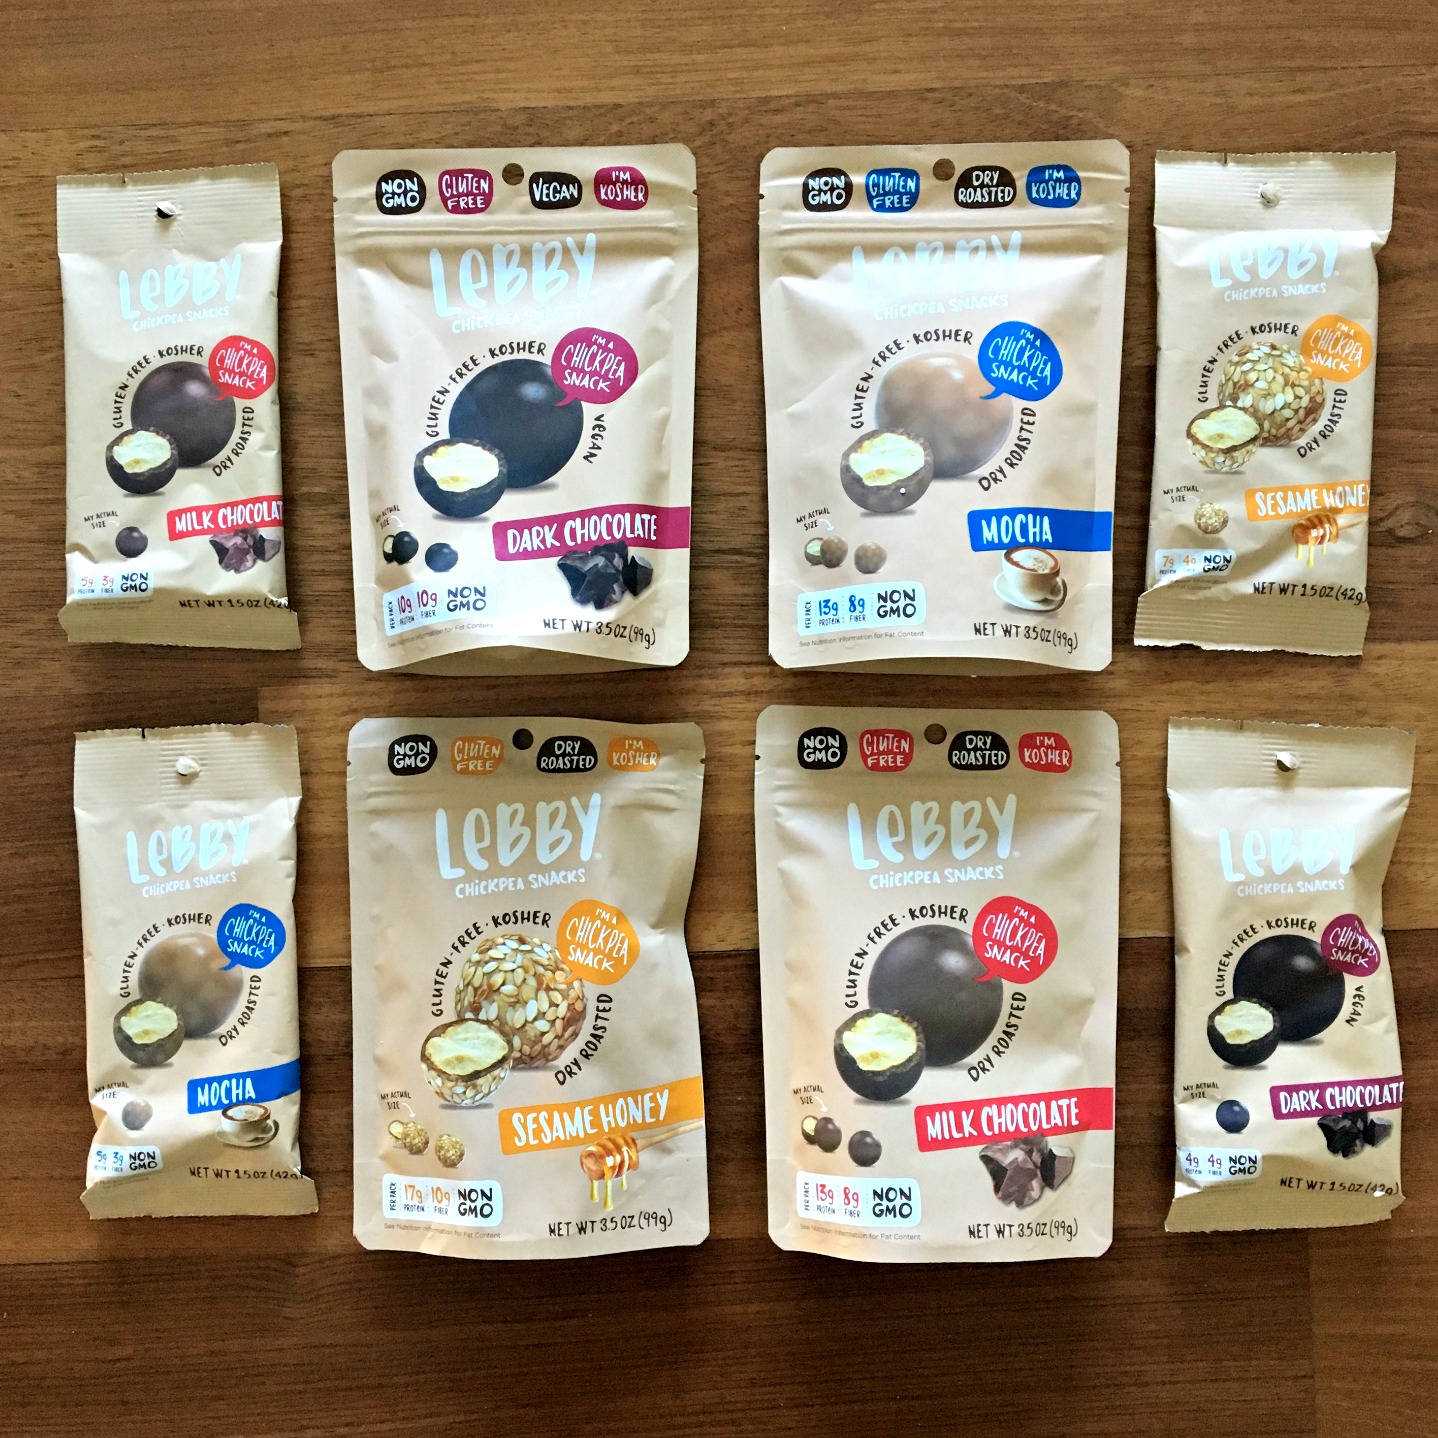 Addictive + Good for You – Lebby Chickpea Snacks! #Giveaway